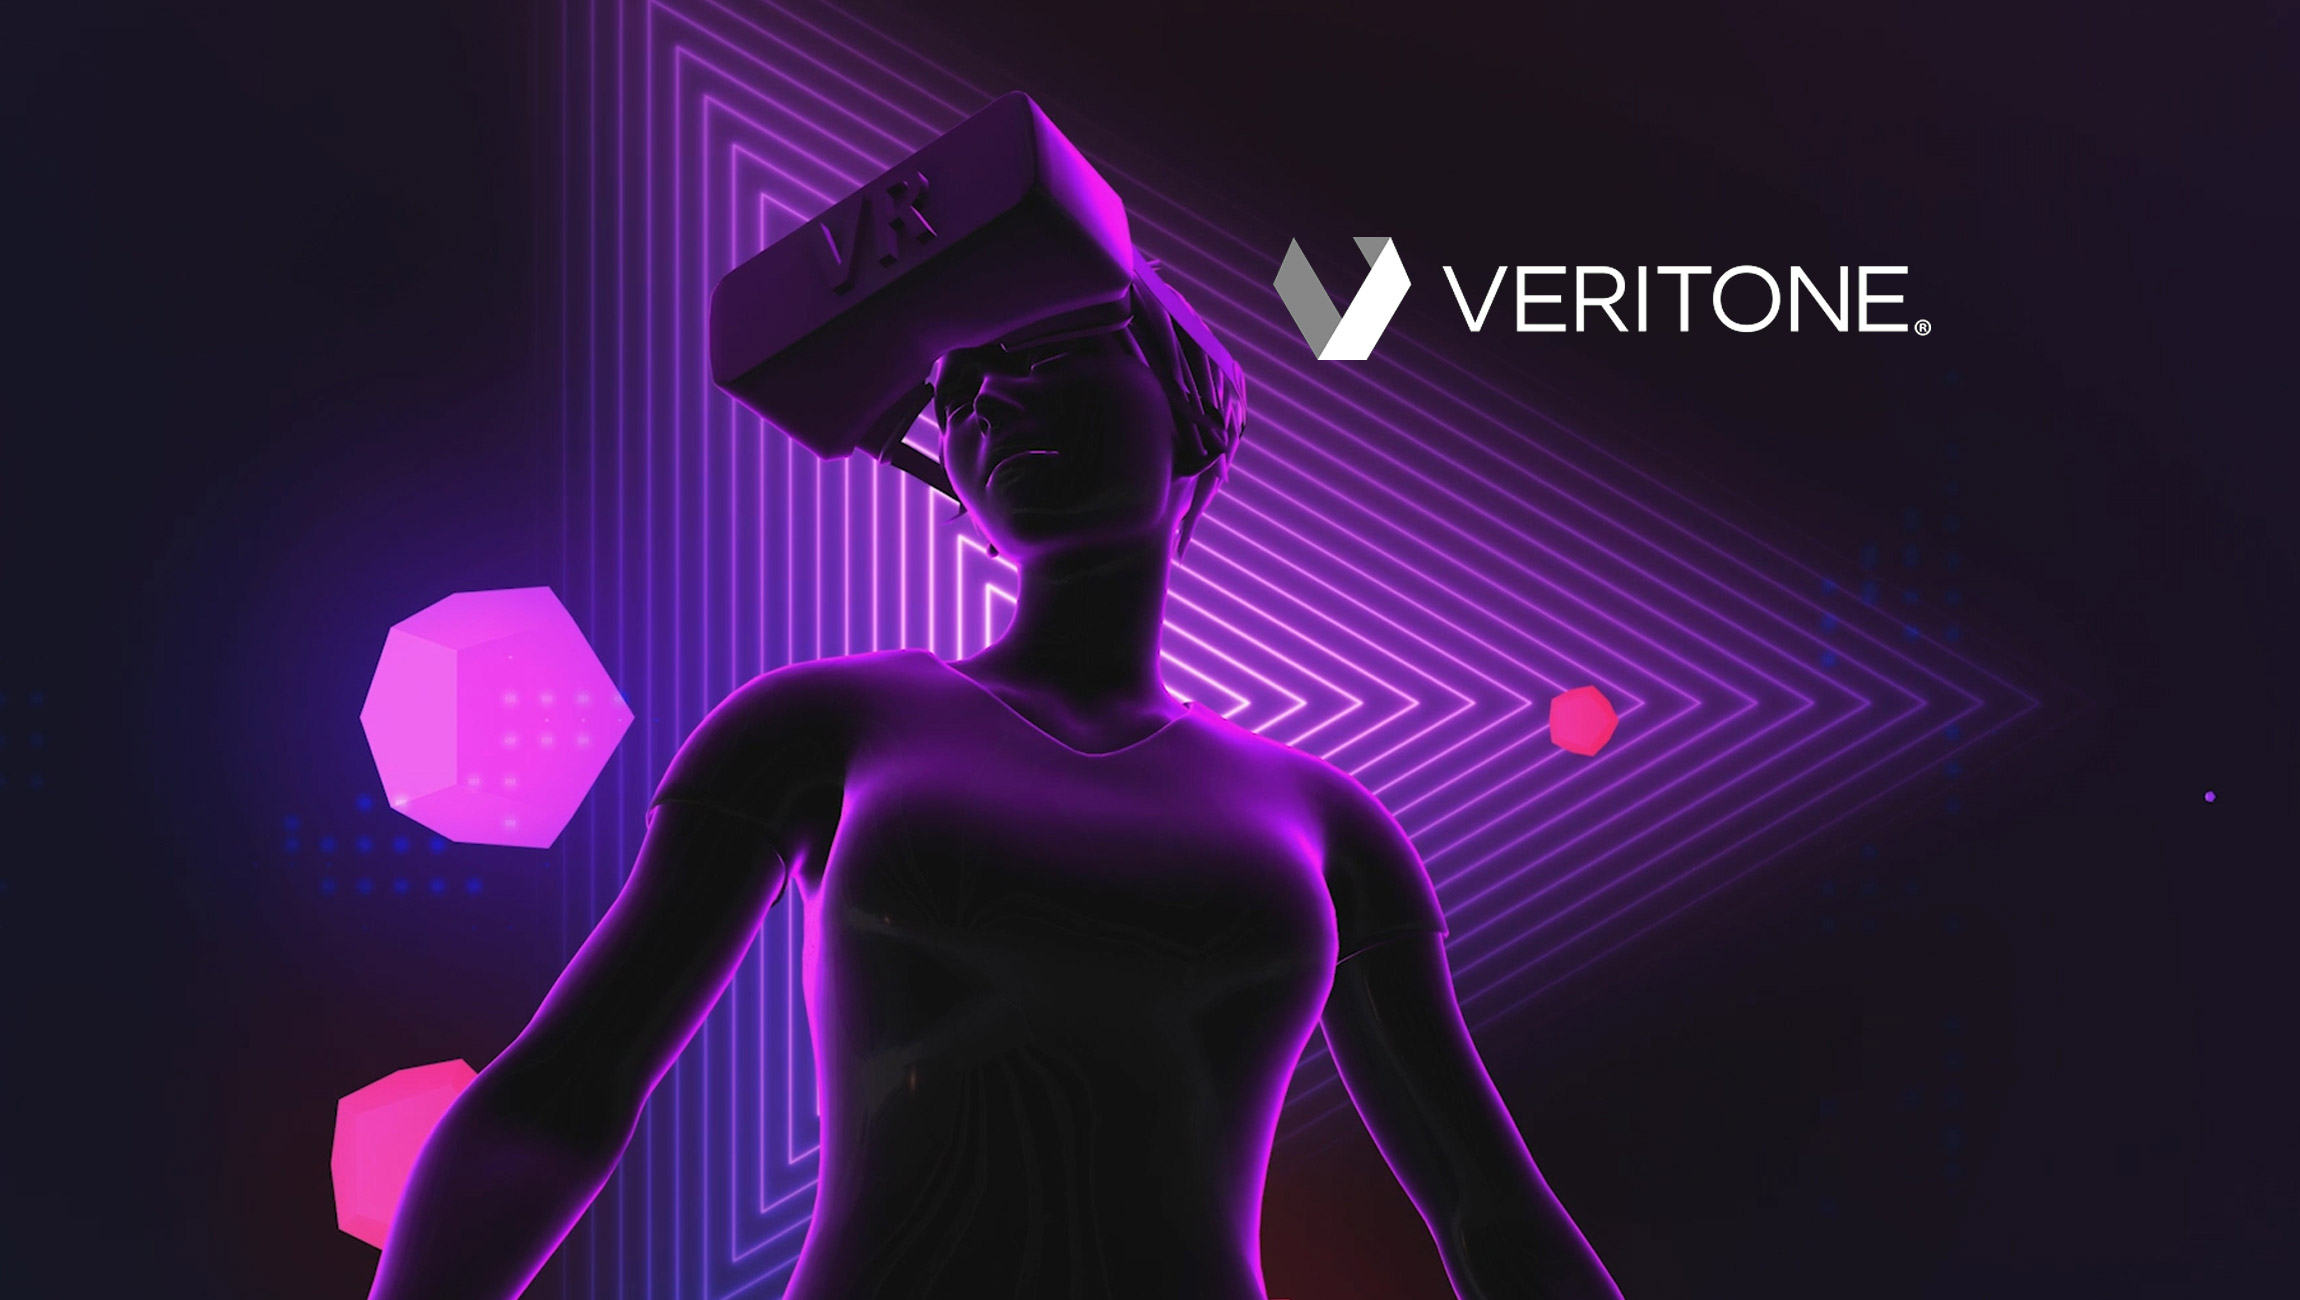 Veritone Launches Veriverse, a Portfolio of Integrated AI Solutions for Content IP Owners and Individuals Leveraging the Metaverse, NFTs and Blockchain